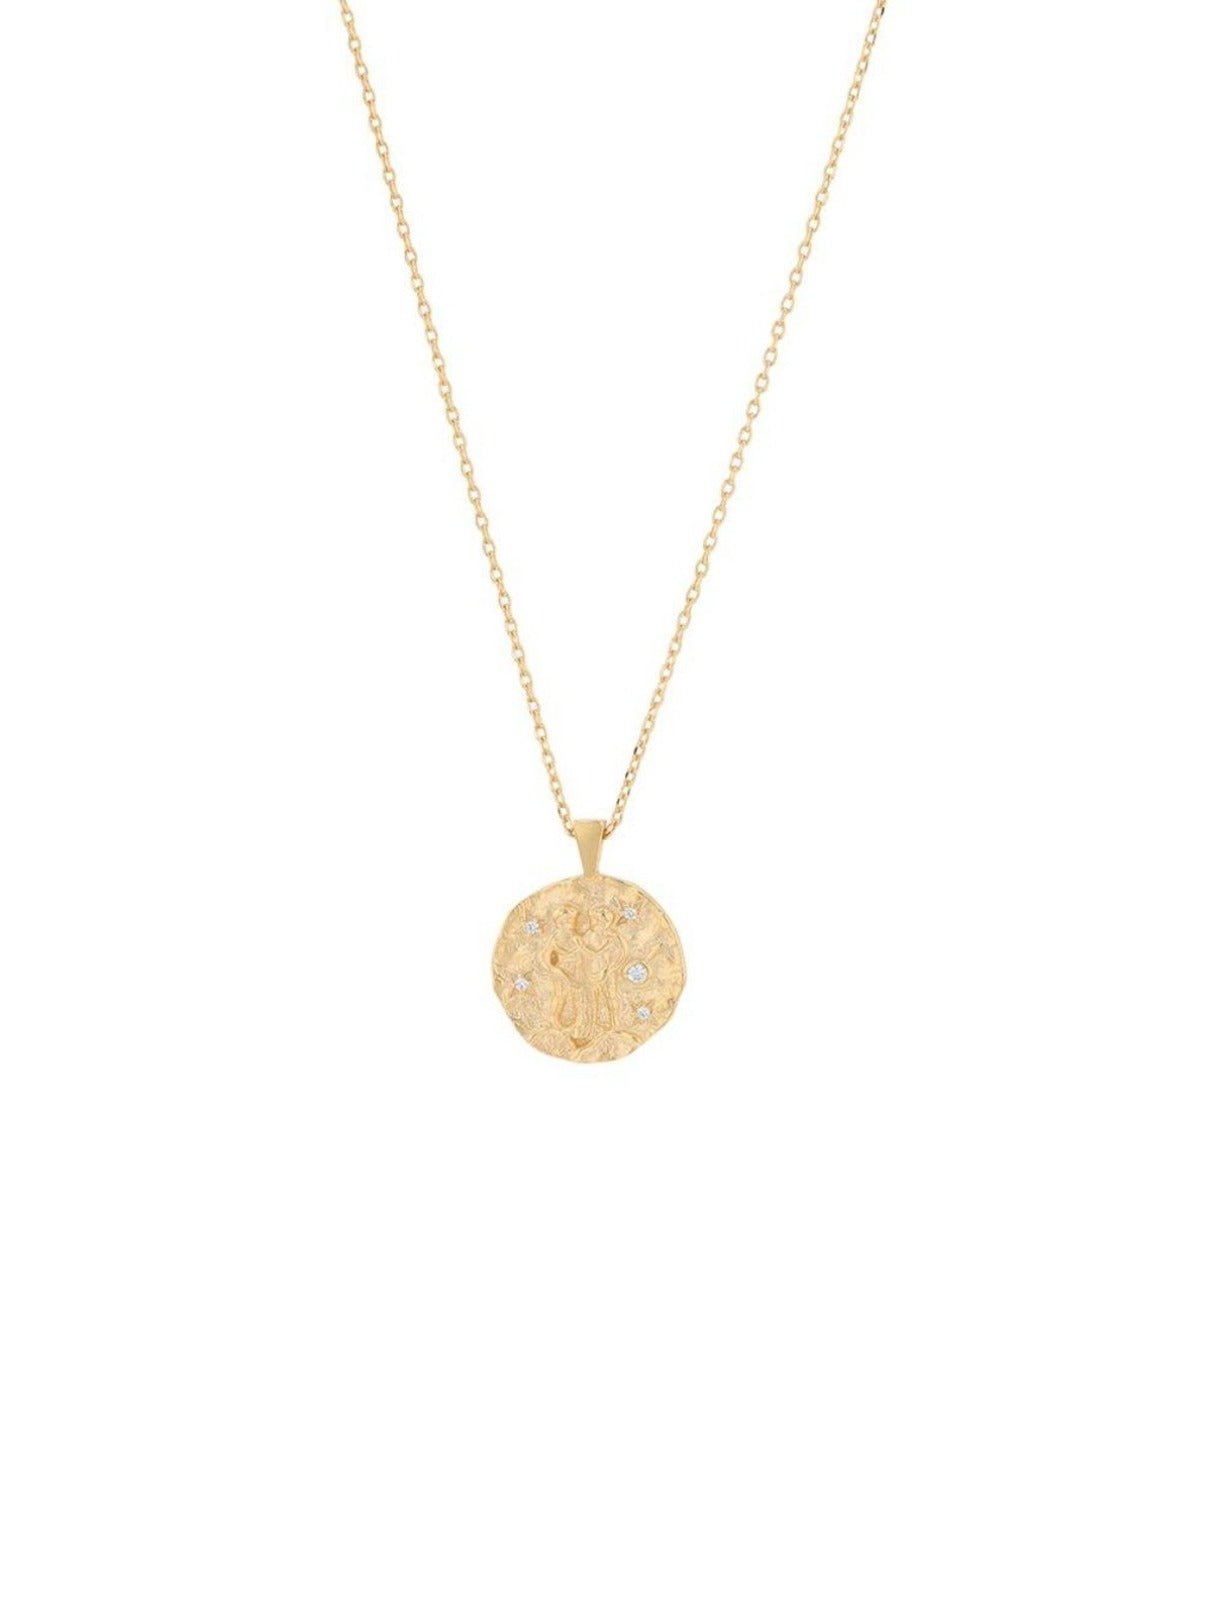 DESCRIPTION:  A coin style necklace in a matte finish with small swarovski crystals. A style perfect to wear layered.      MATERIAL AND  DIMENSIONS:   - Brass base with thick gold / silver plating  - Chain length 42 cm